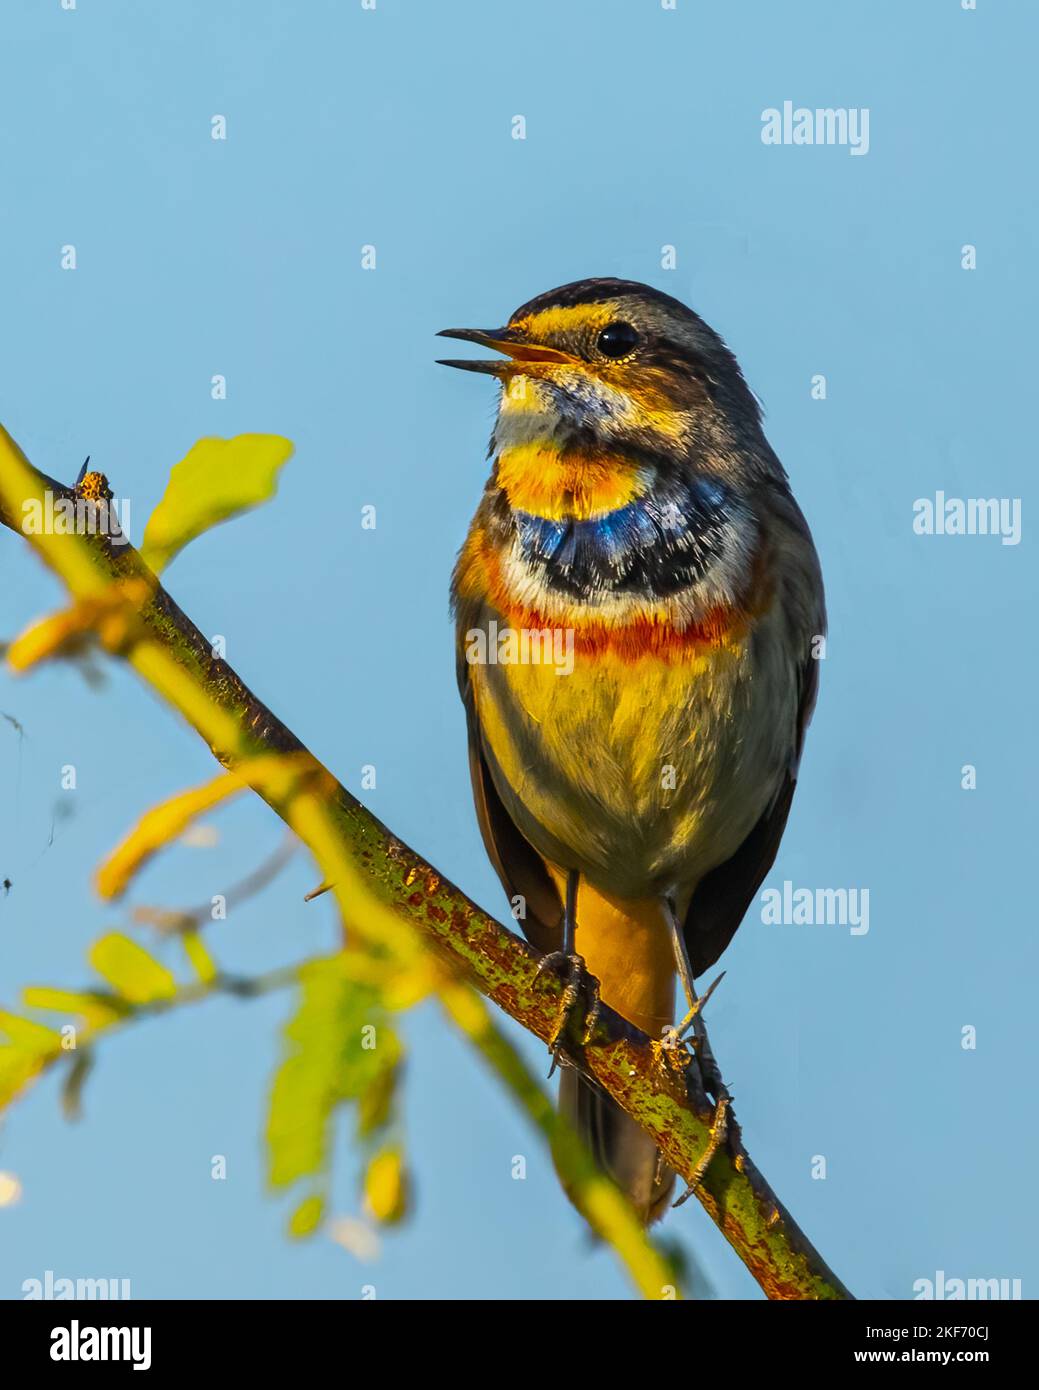 the male bird is the Bluethroat Nightingale sings to attract the